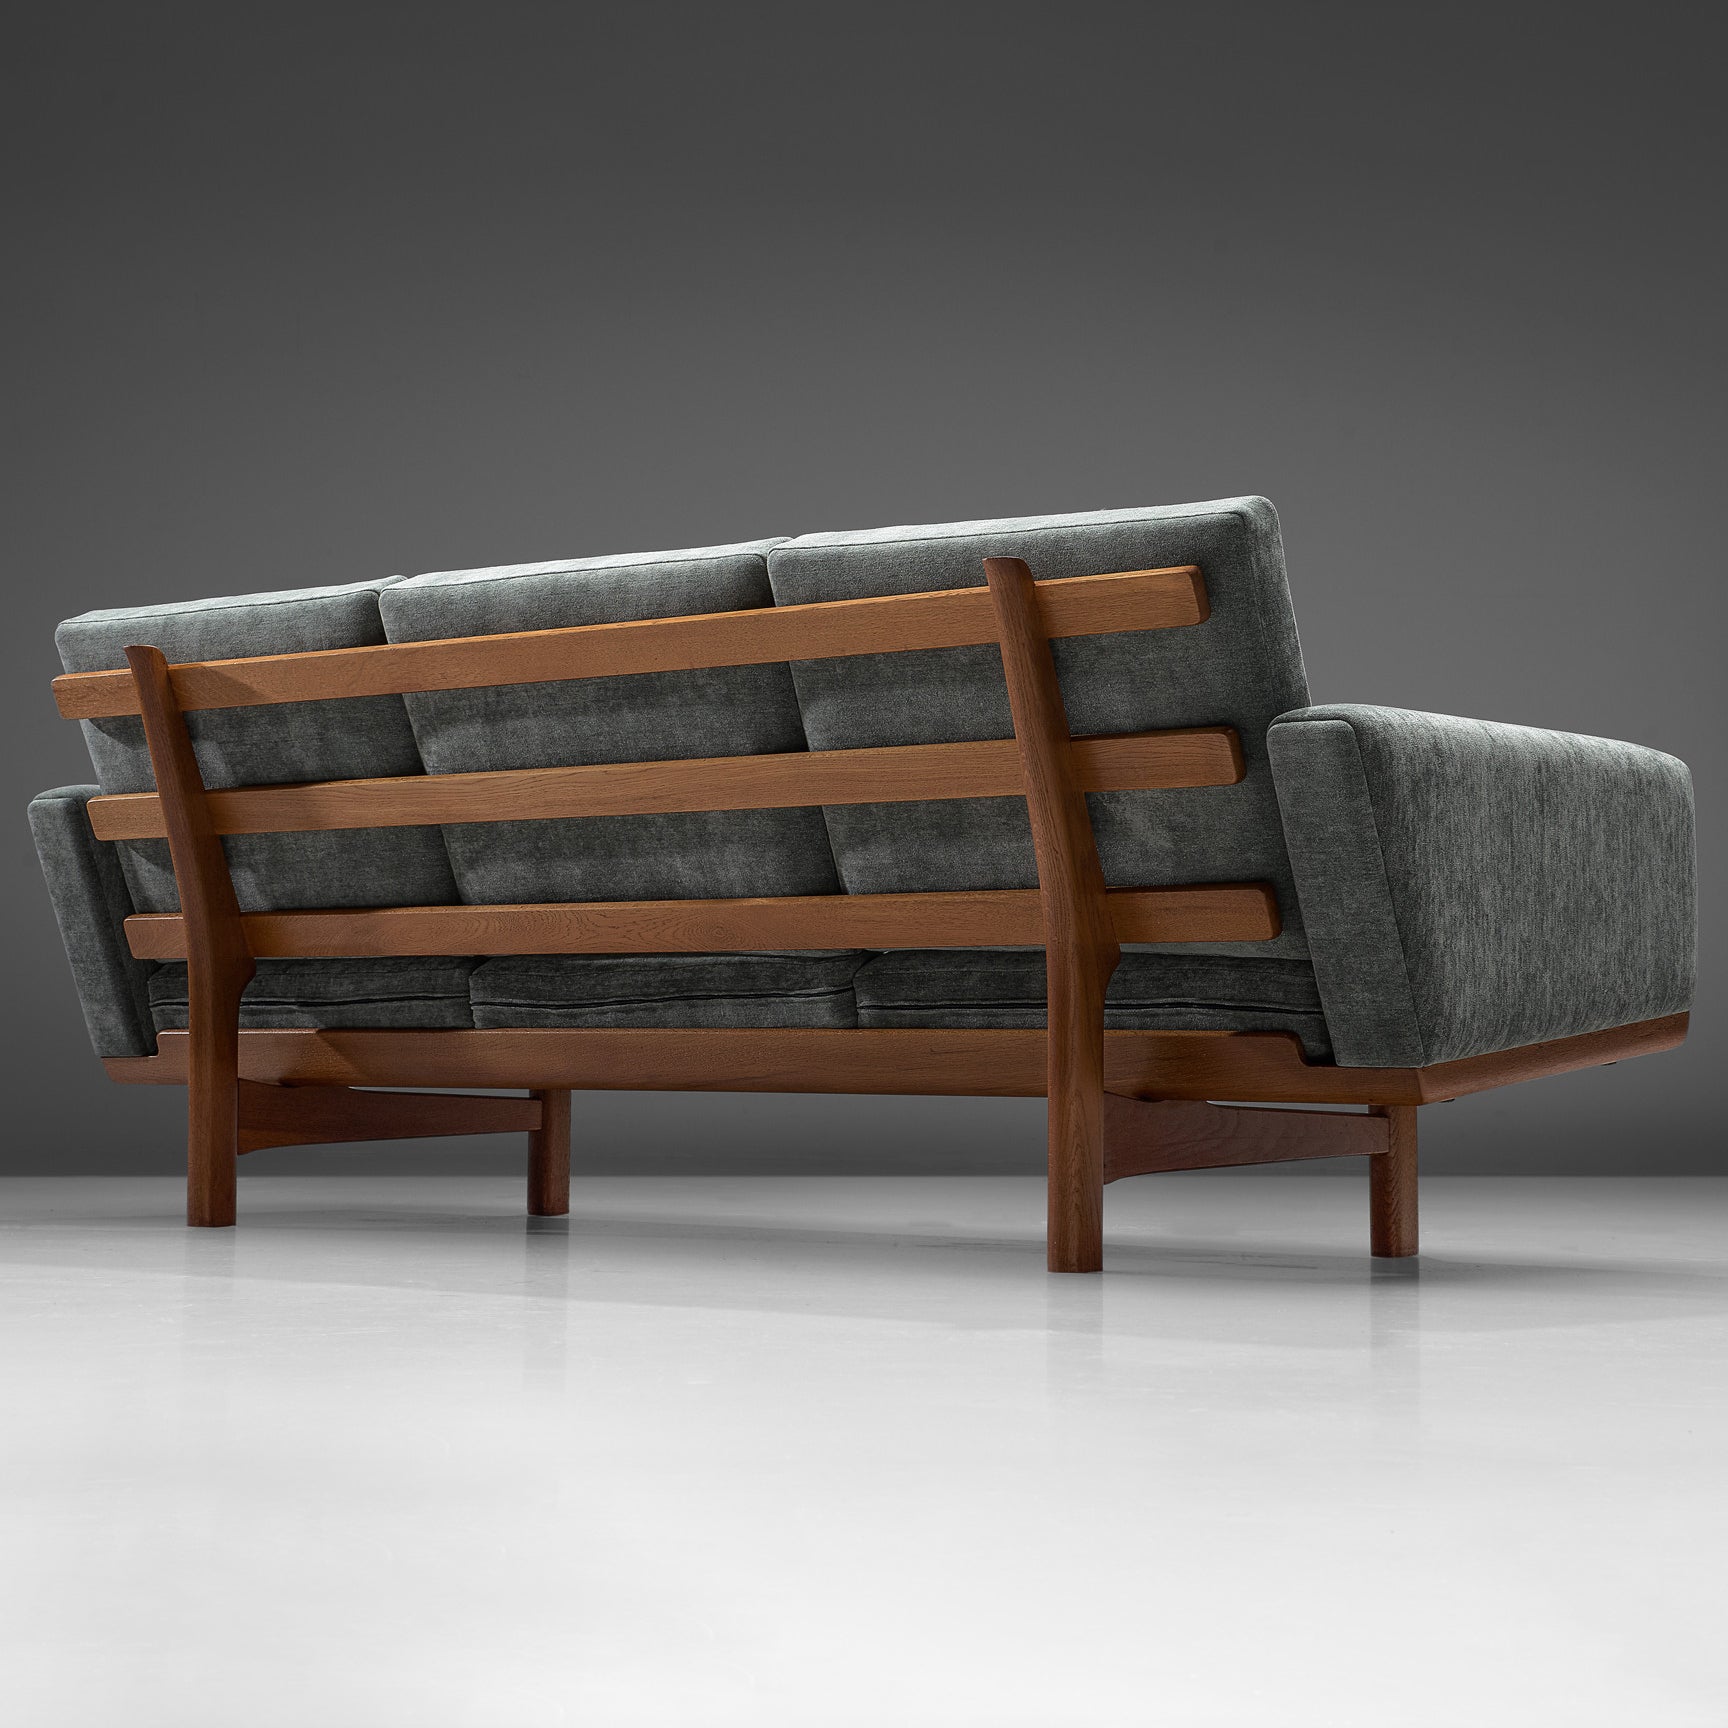 Hans J. Wegner, three-seat sofa model GE-236/3, fabric and oak, Denmark, 1950s

Beautiful sofa by Danish designer Hans J. Wegner. This sofa has a solid oak frame with the construction of the frame visible at the back of the sofa. Due to the high